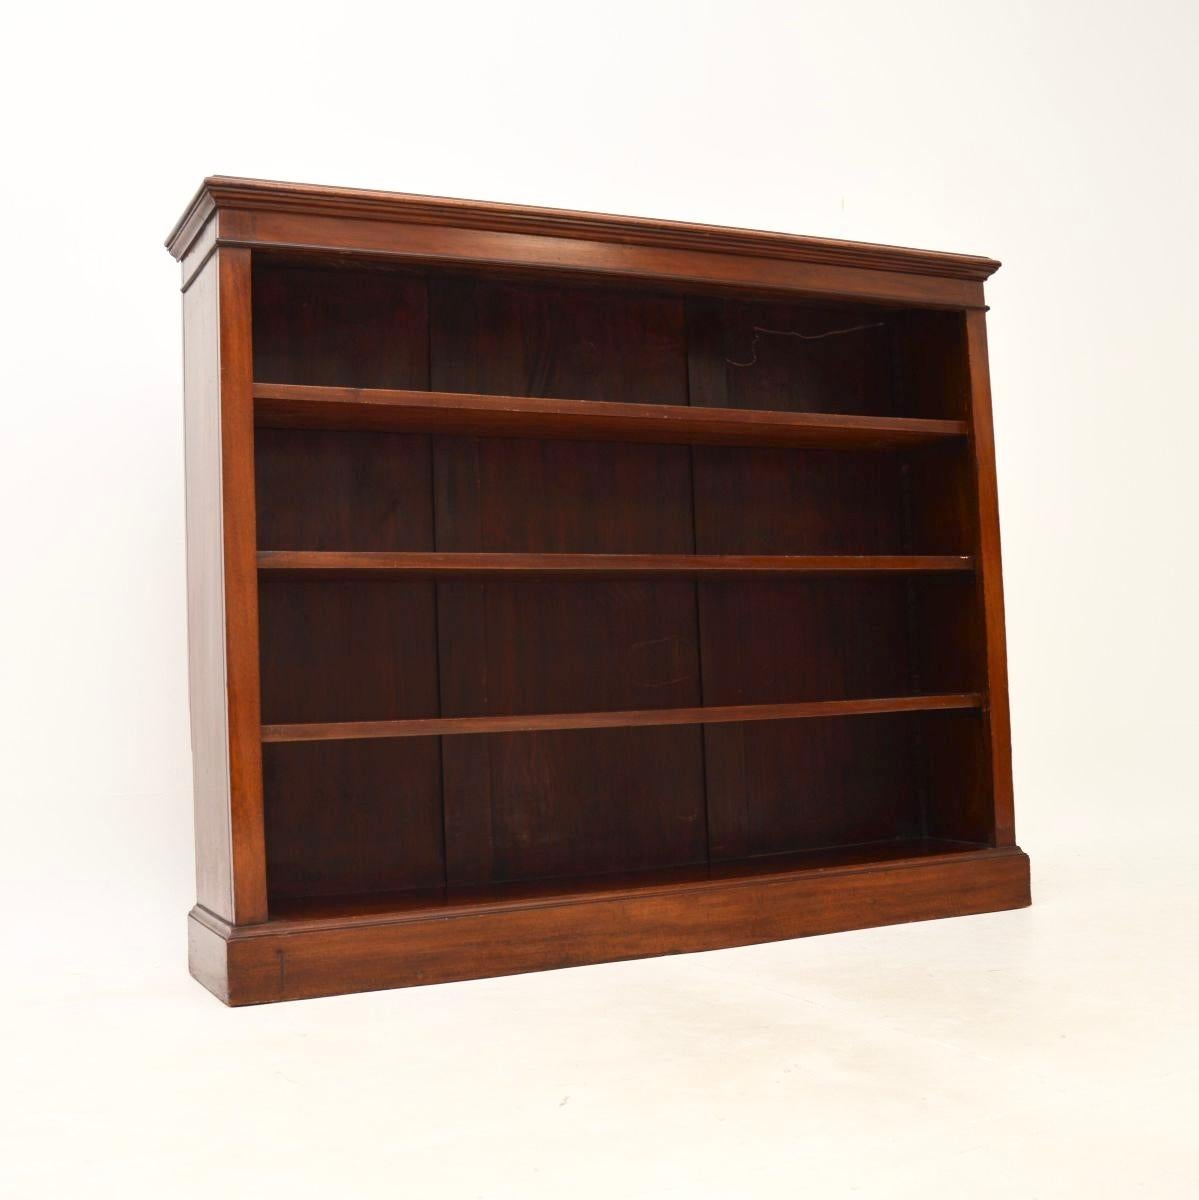 A wonderful antique Victorian open bookcase. This was made in England, it dates from around the 1880’s period.

It is of fine quality and is a very useful size with lots of storage space. The shelves are all adjustable and removable with shark teeth